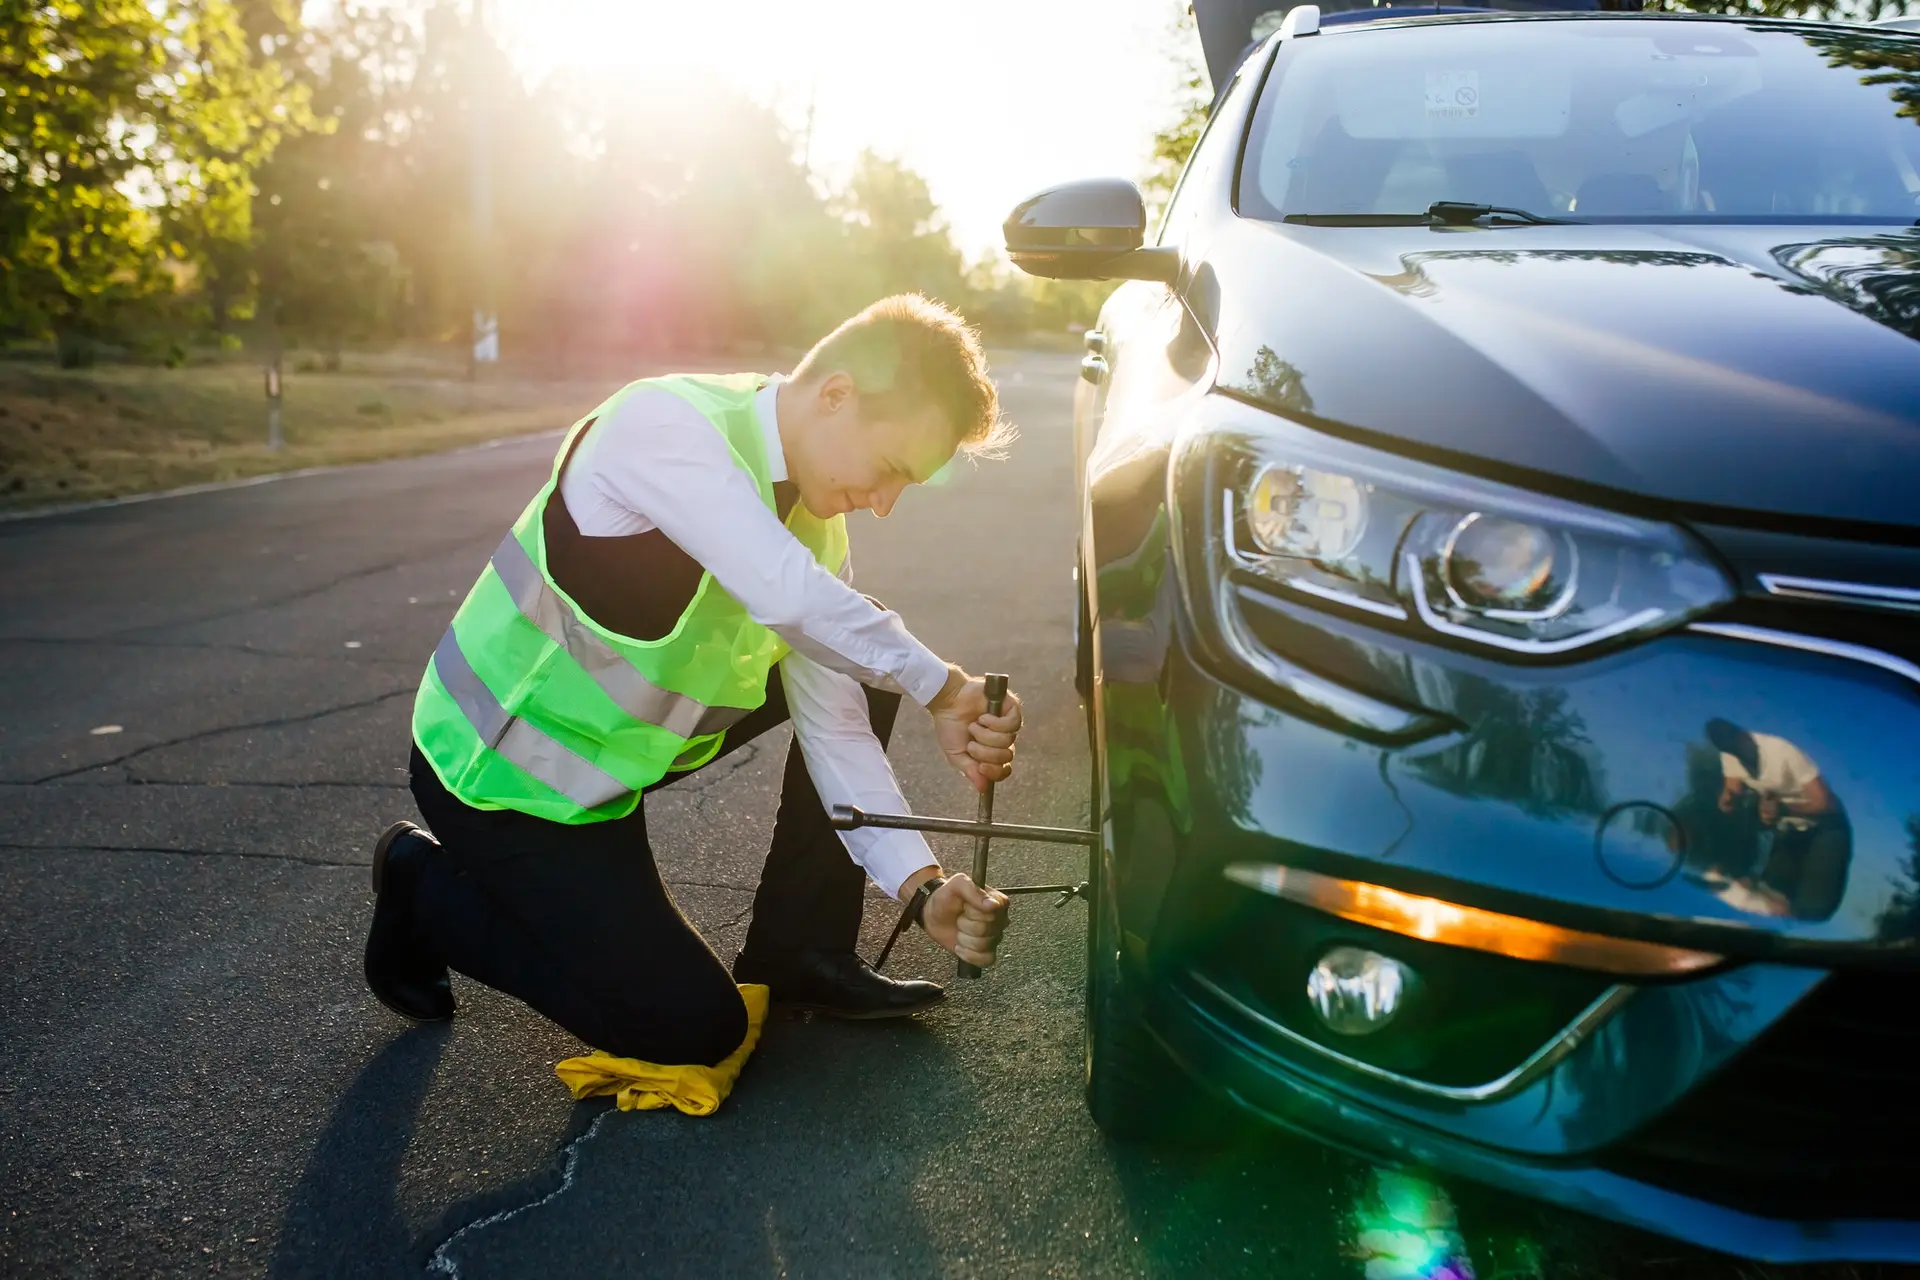 When Do You Need Emergency Tire Service? A man in a green safety vest changes a flat tire on a road.